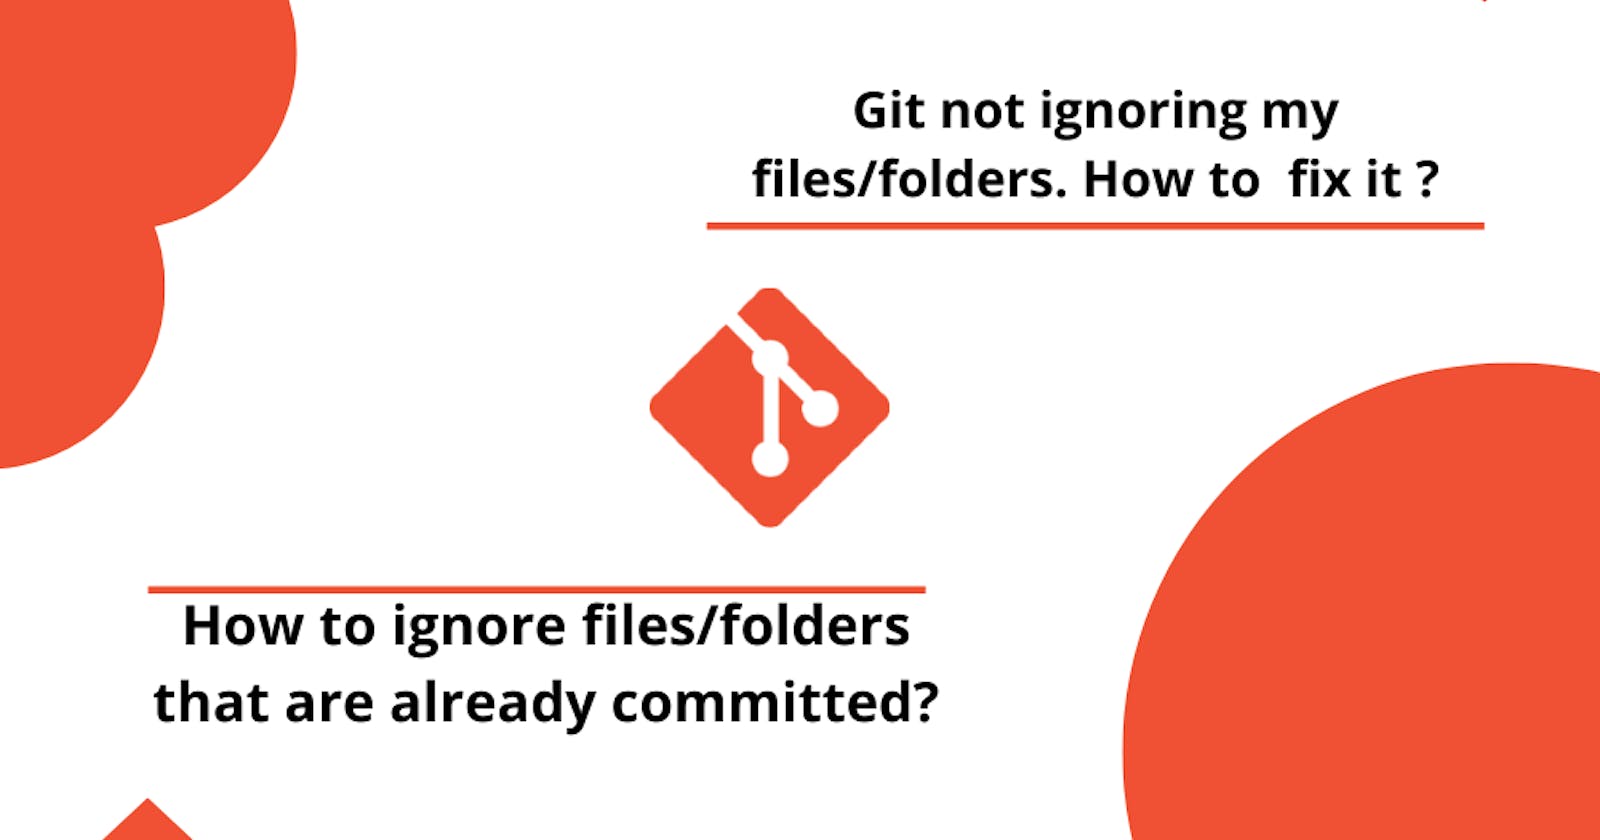 My .gitignore doesn’t work, git not ignoring my files/folders. How to fix it? How to ignore committed files/folders?